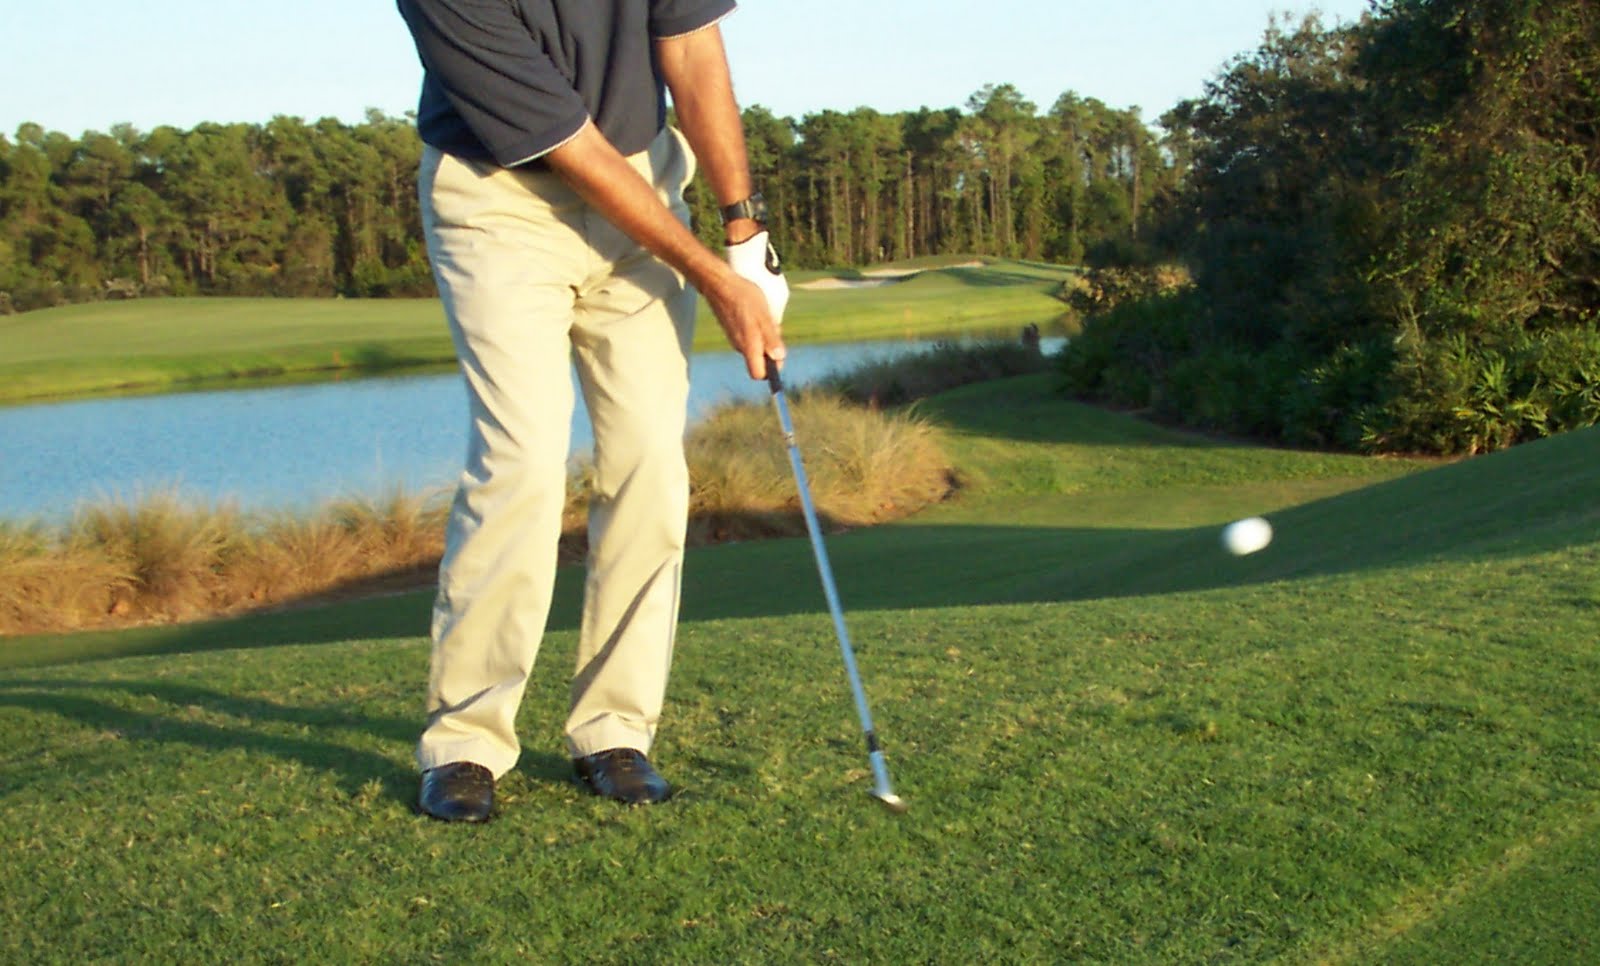 Golf Chipping Tips and you’ll be taking strokes off your